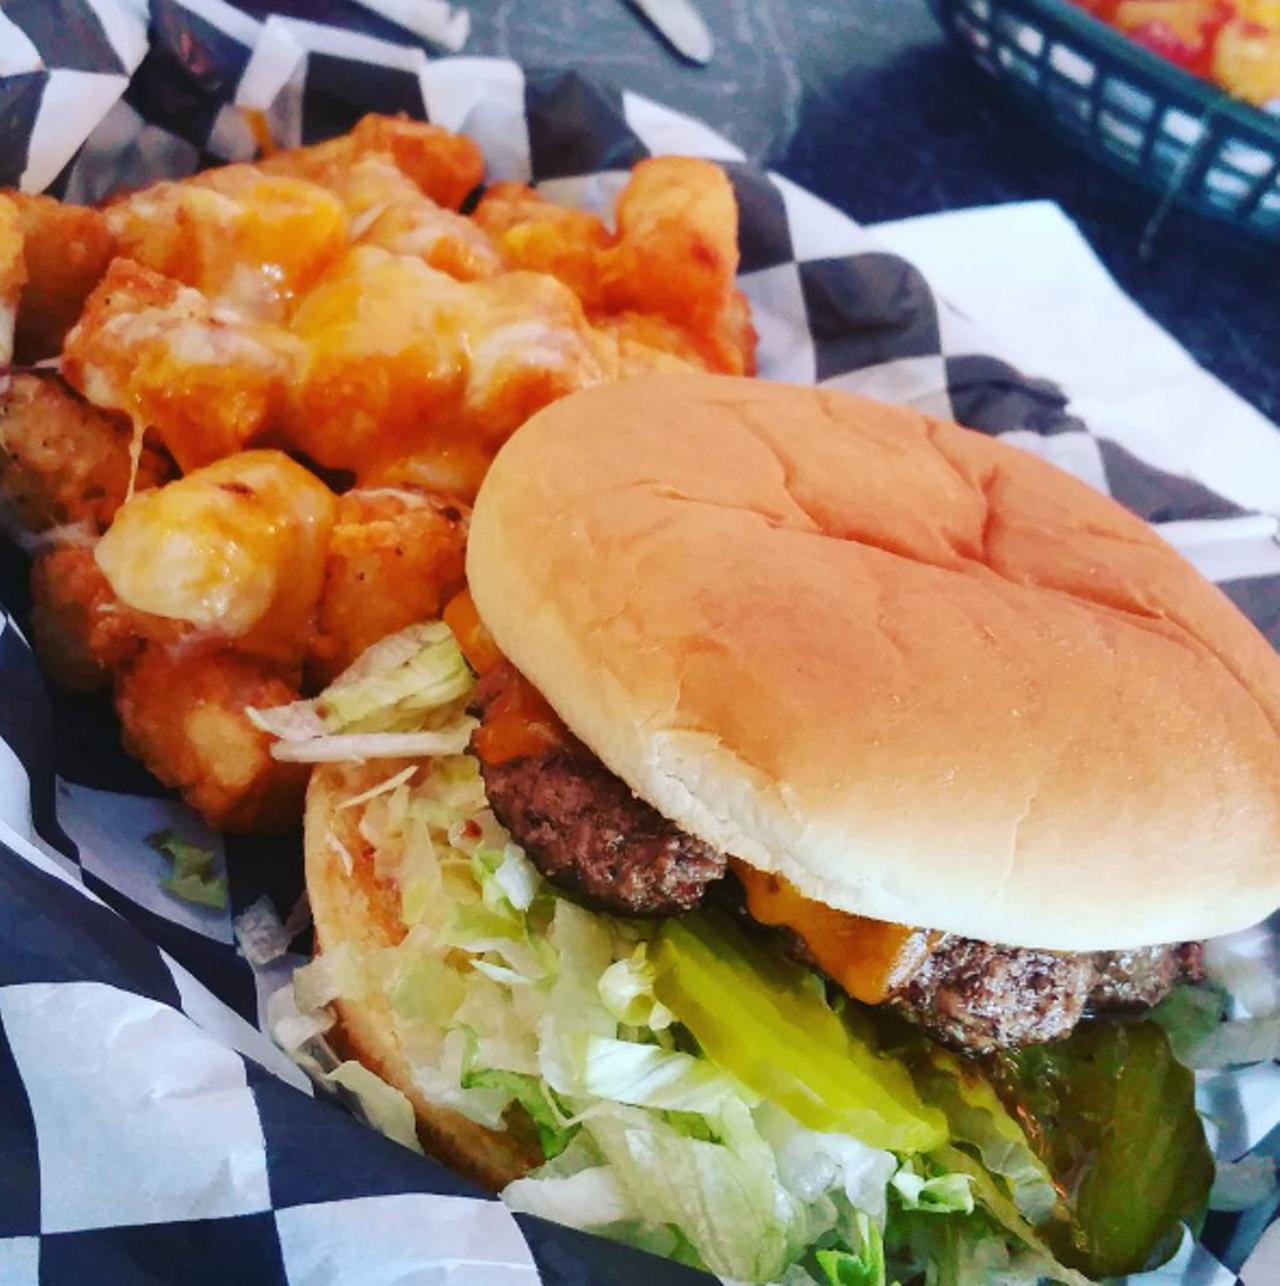 Cheesy Jane's
Lovers of the Broadway staple will want to load up on this home-style sliders and pair it with their sweet fries or tots. 
Photo via Instagram,  mrparkour210